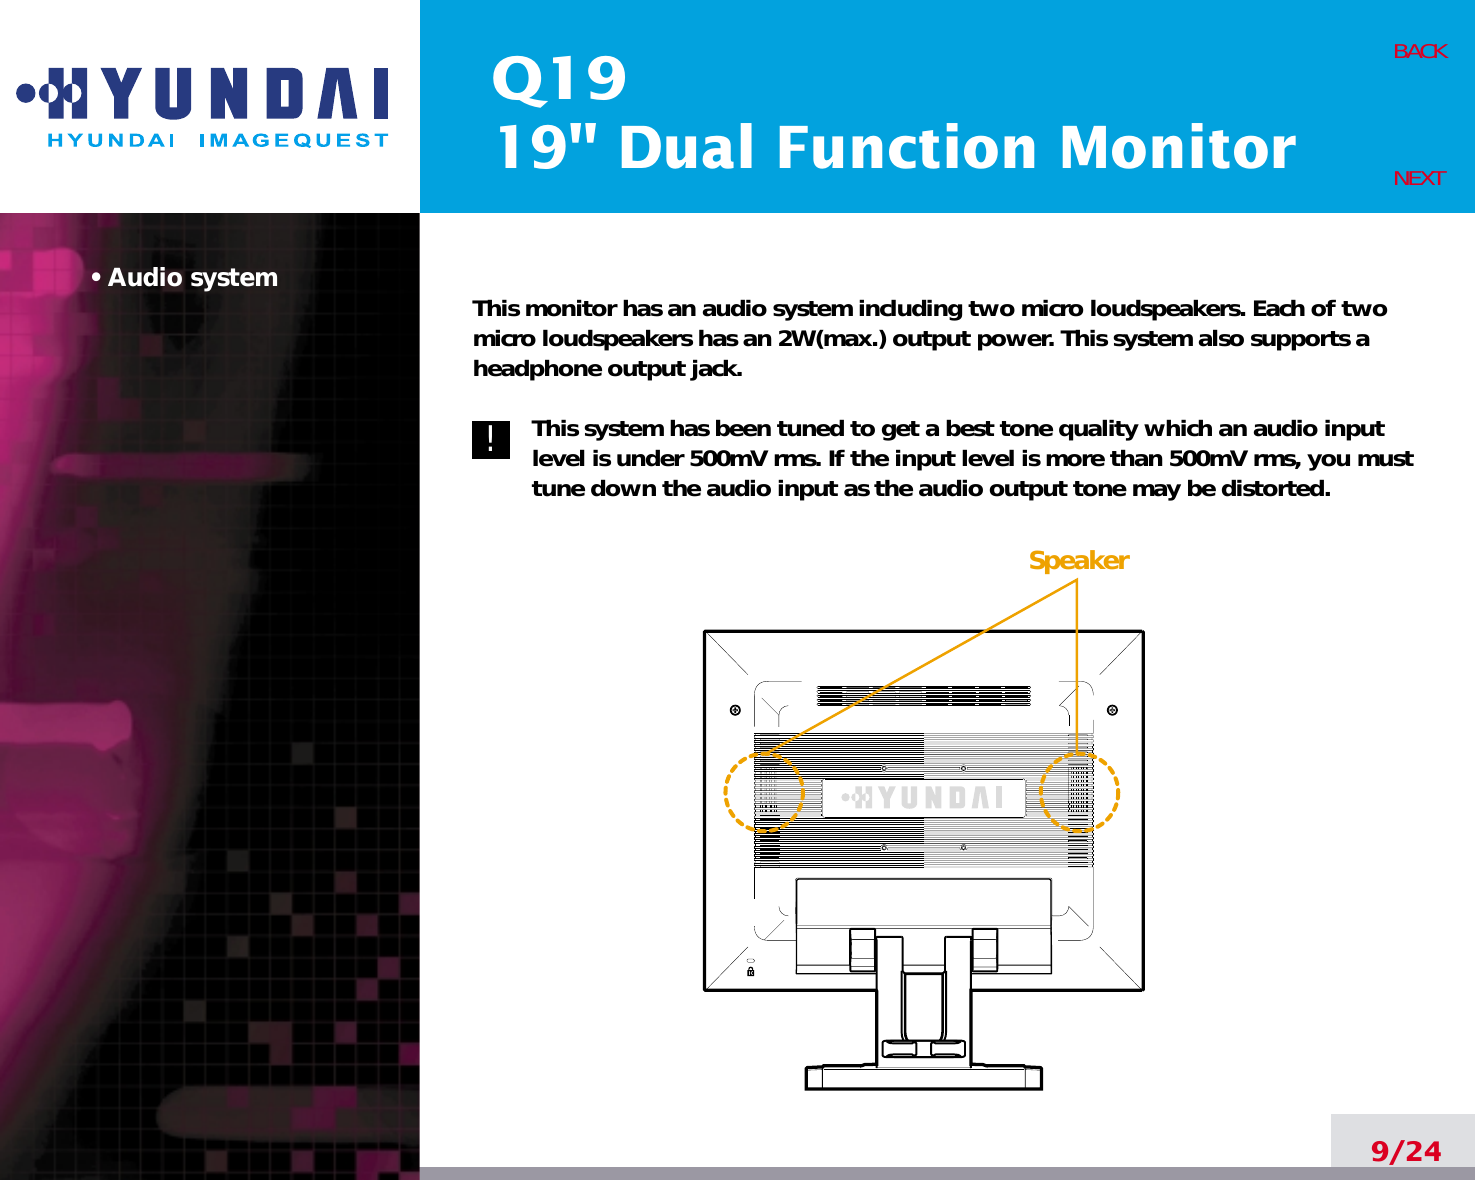 Q1919&quot; Dual Function Monitor• Audio system This monitor has an audio system including two micro loudspeakers. Each of twomicro loudspeakers has an 2W(max.) output power. This system also supports aheadphone output jack.This system has been tuned to get a best tone quality which an audio inputlevel is under 500mV rms. If the input level is more than 500mV rms, you musttune down the audio input as the audio output tone may be distorted.9/24BACKNEXT!!Speaker